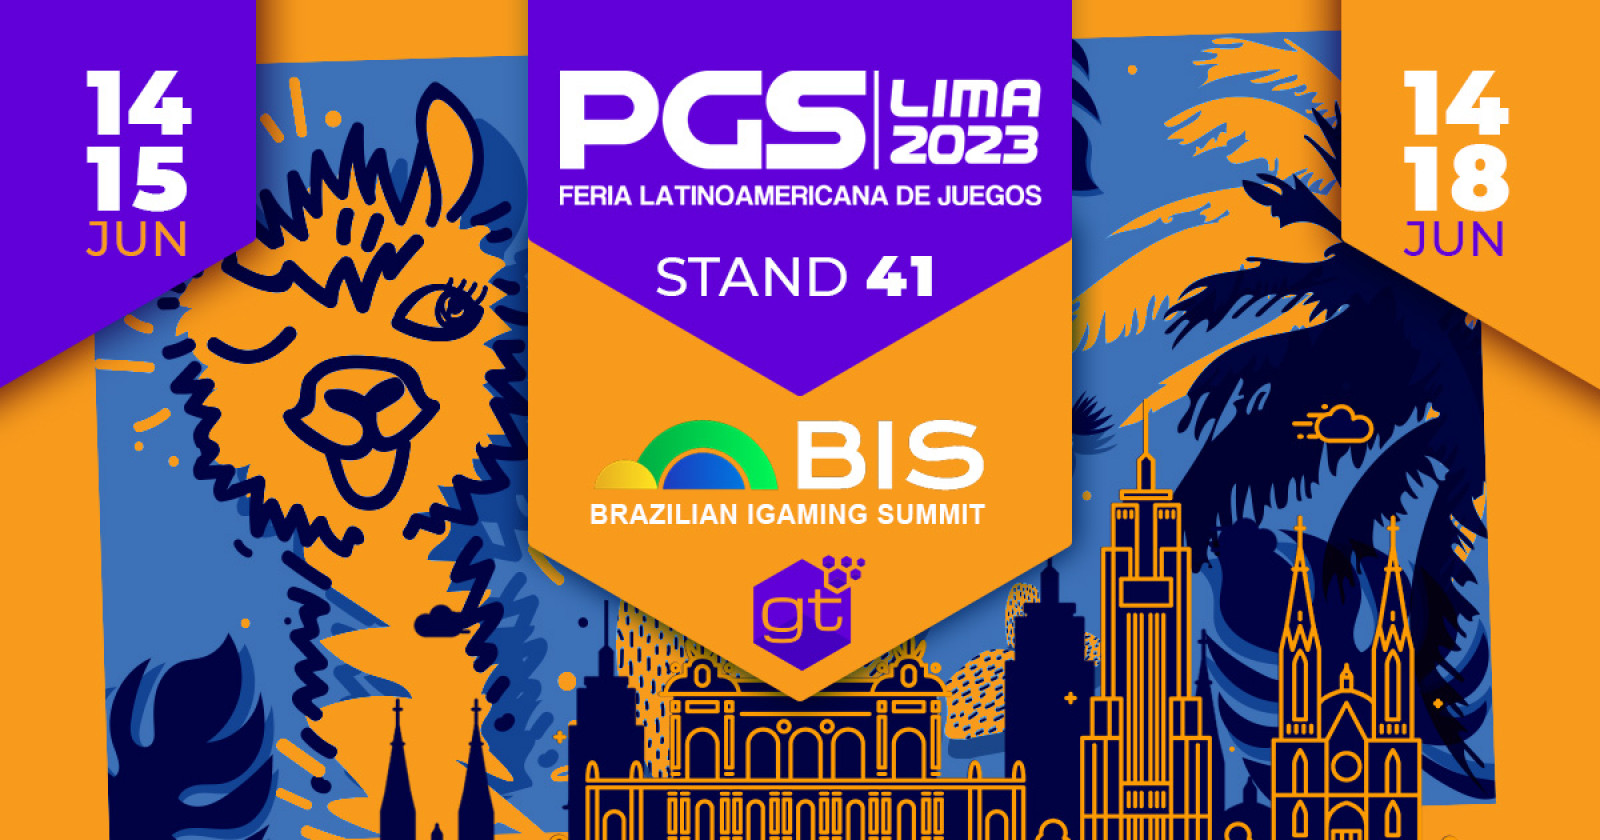 Gamingtec's adventure to South America, attending PGS and BIS